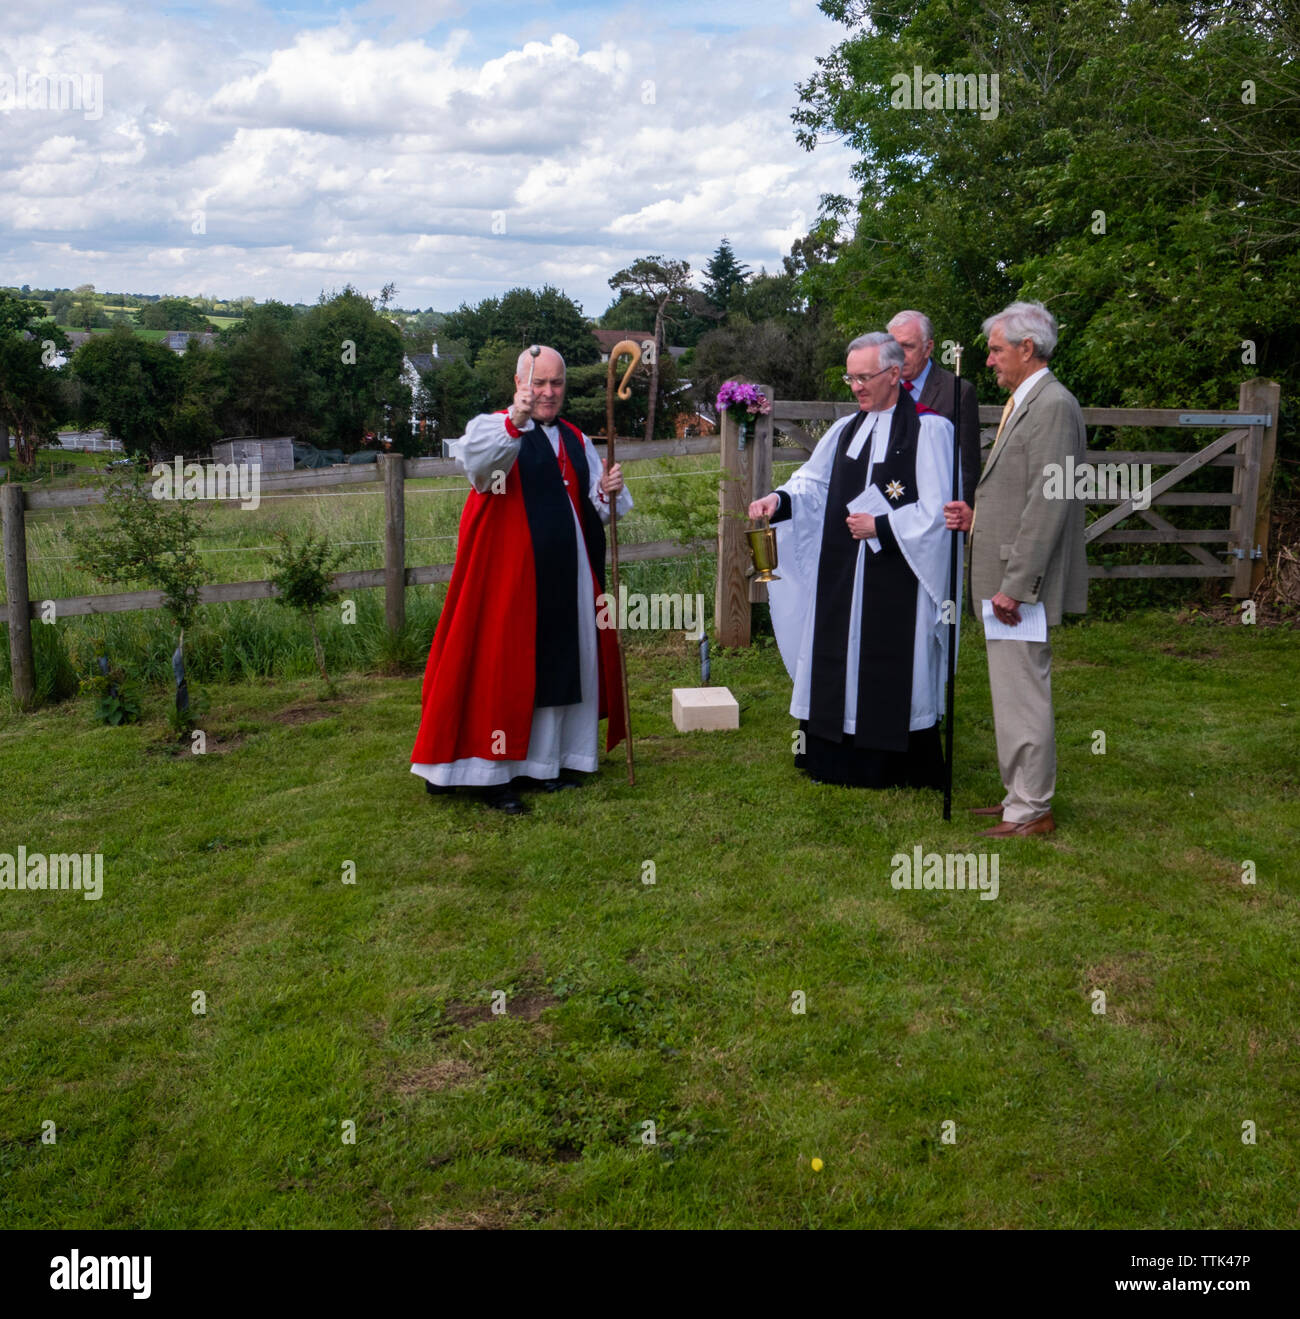 This service is very rarely performed as few churchyard extensions are being built.  The Bishop accompanied by the vicar the Reverend Doctor Robert Beaken and two church wardens walks around the plot making the sign of the cross with his staff and blessing the ground at each corner Stock Photo